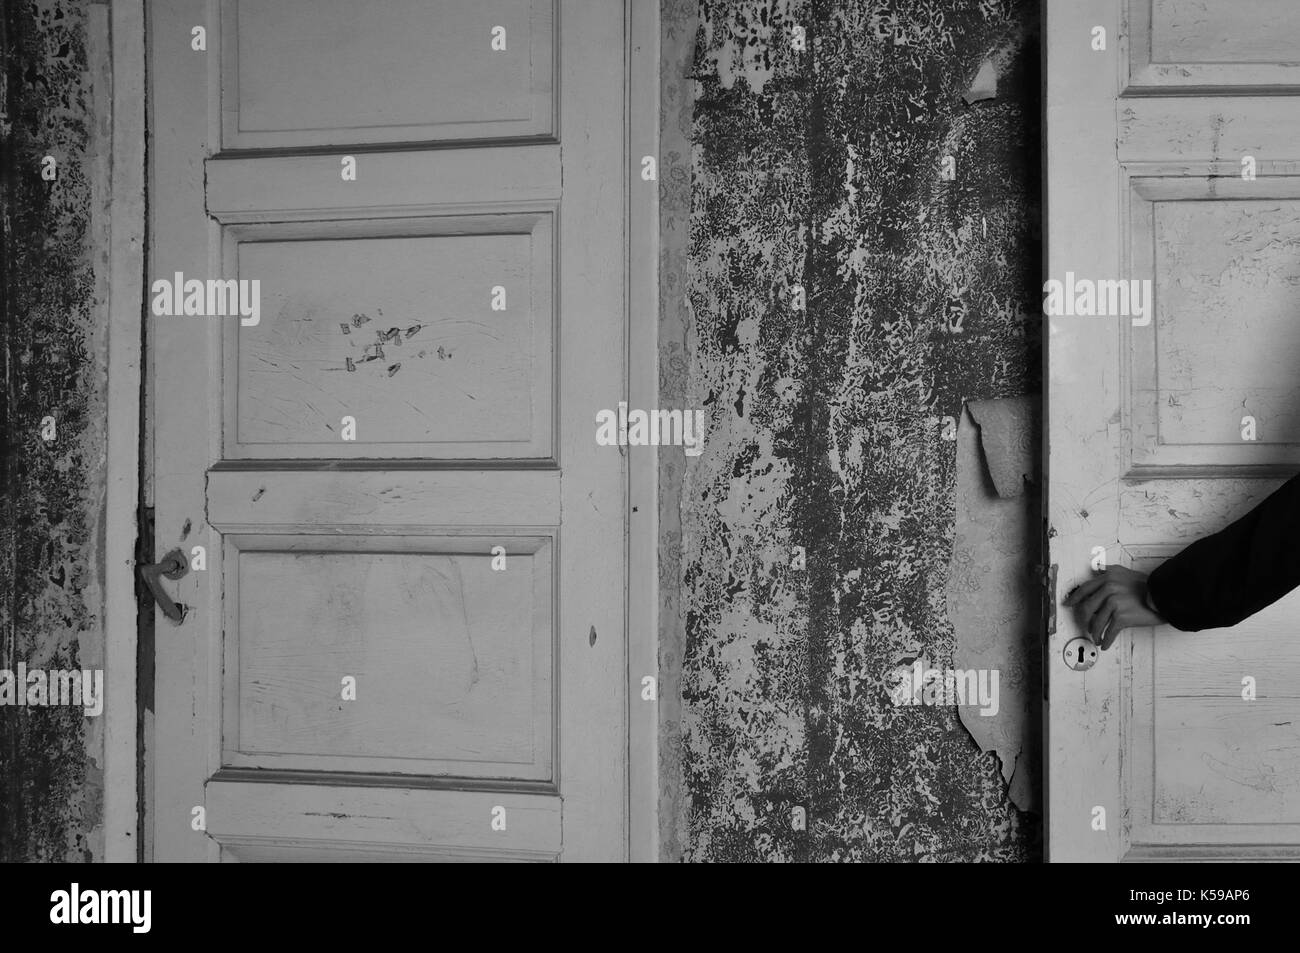 Arm with doll hand on the door of a haunted house. Black and white. Stock Photo